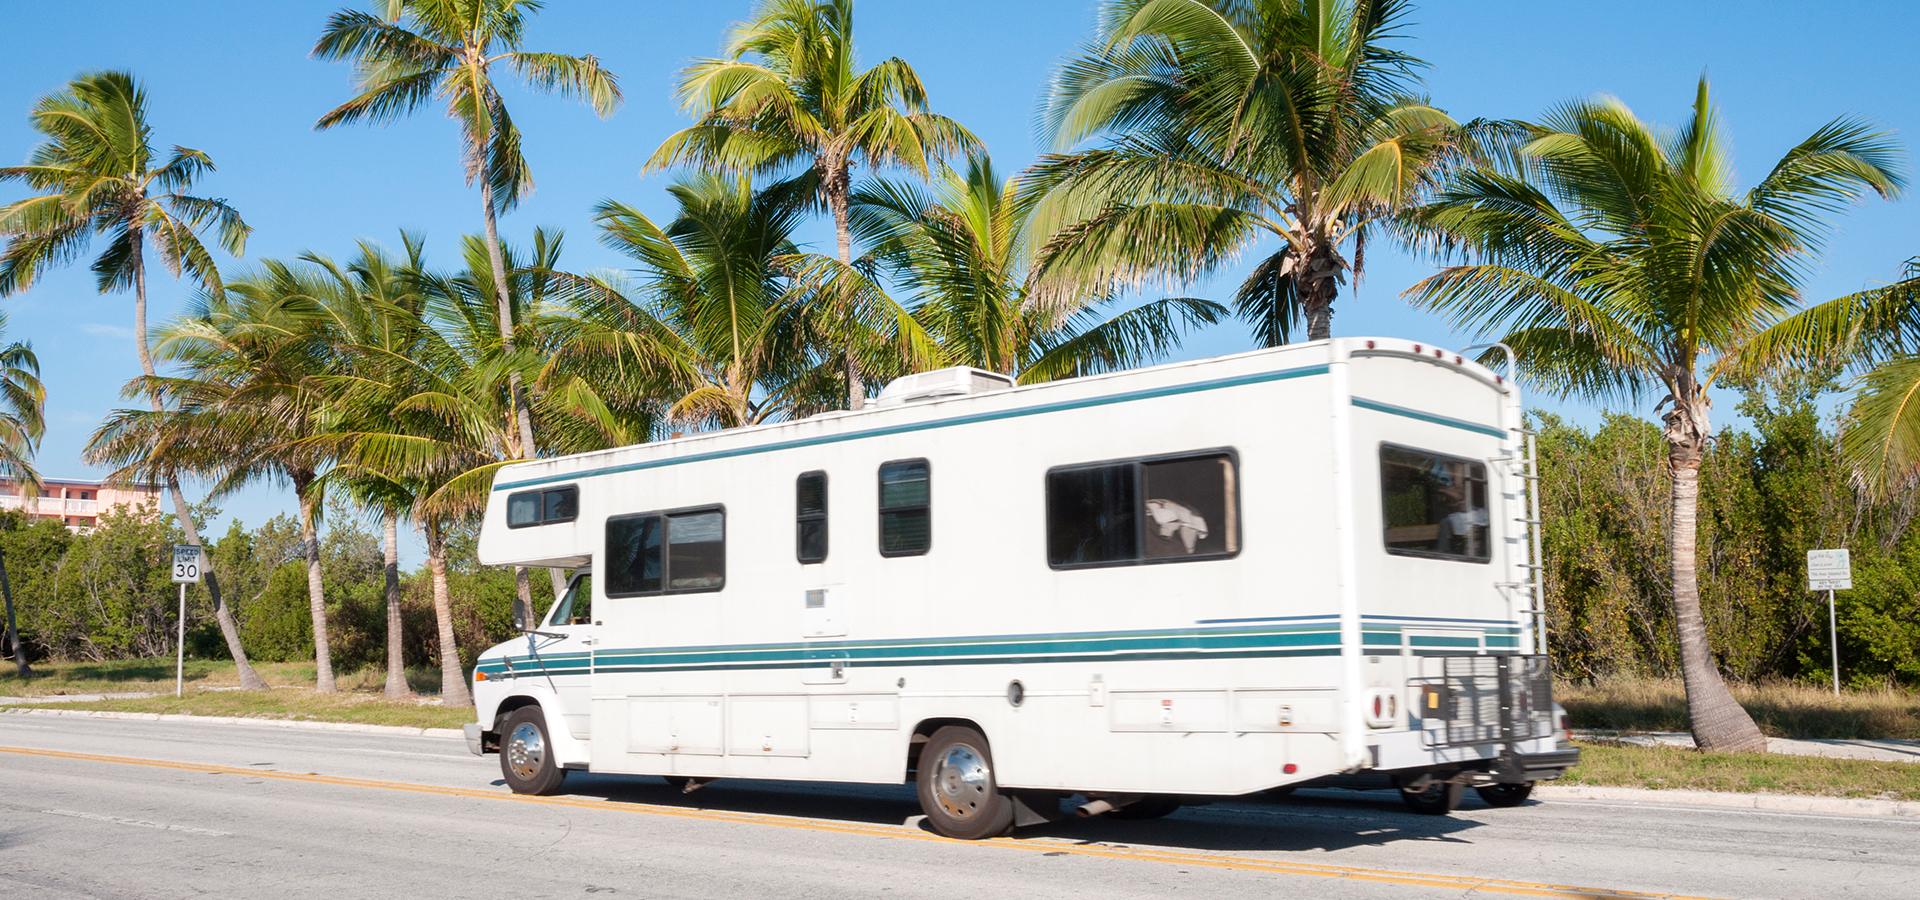 The Best Places in Florida to Visit in Your RV